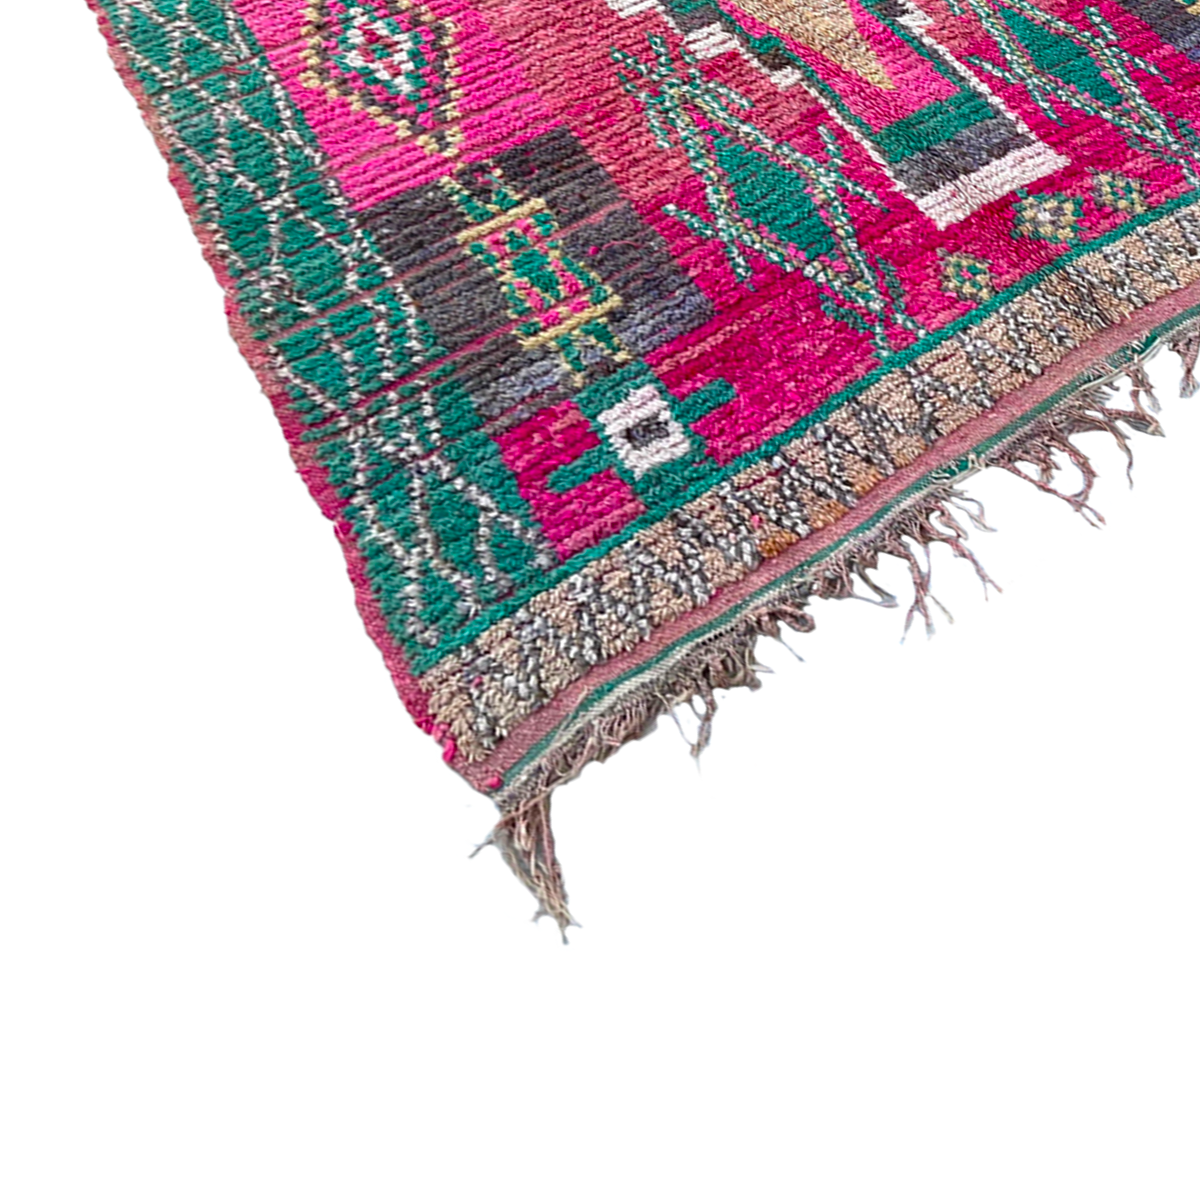 Moroccan Berber Rugs For Sale